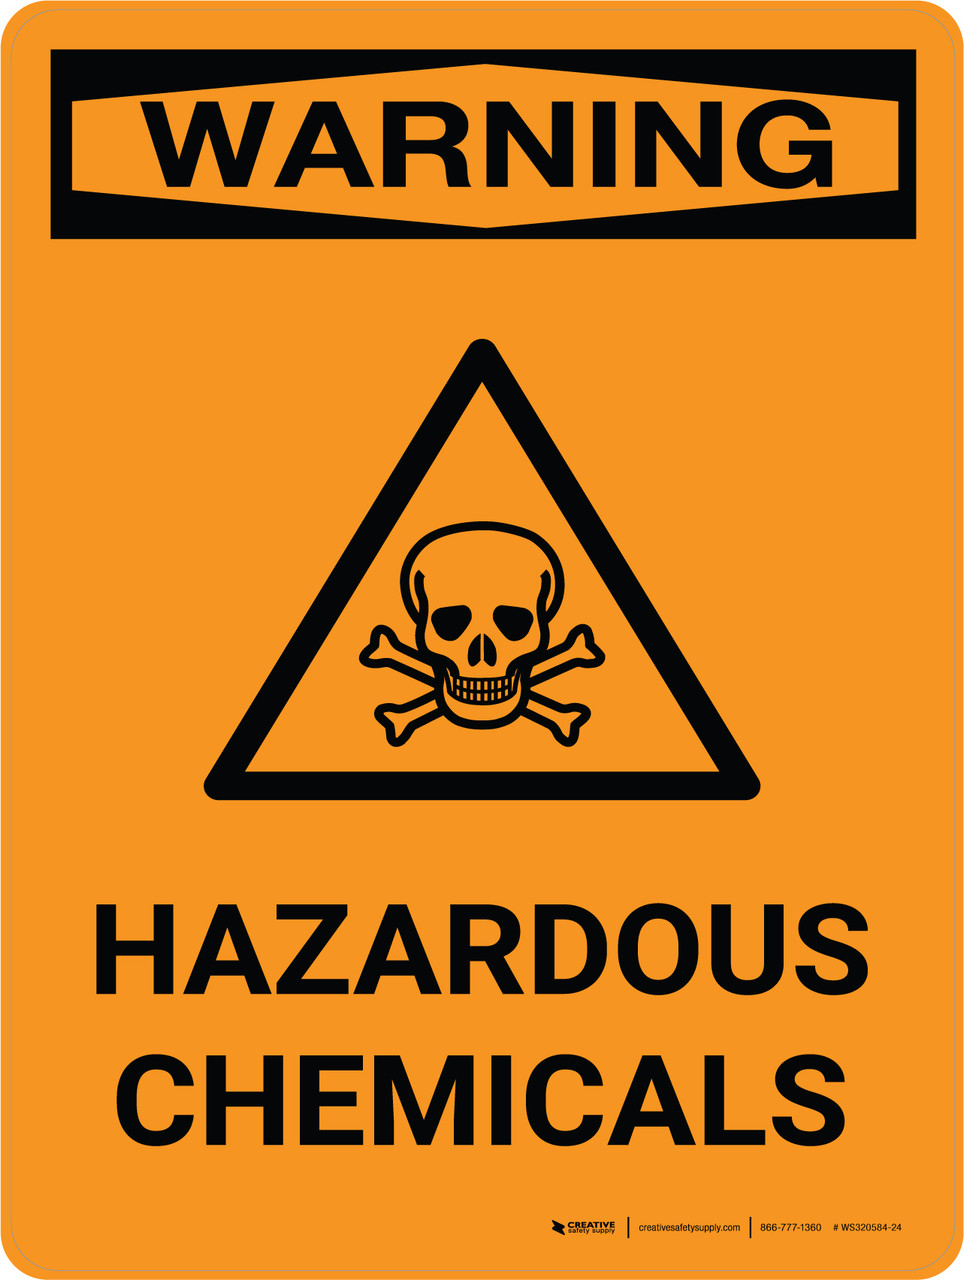 Warning Hazardous Chemicals Portrait With Graphic Wall Sign